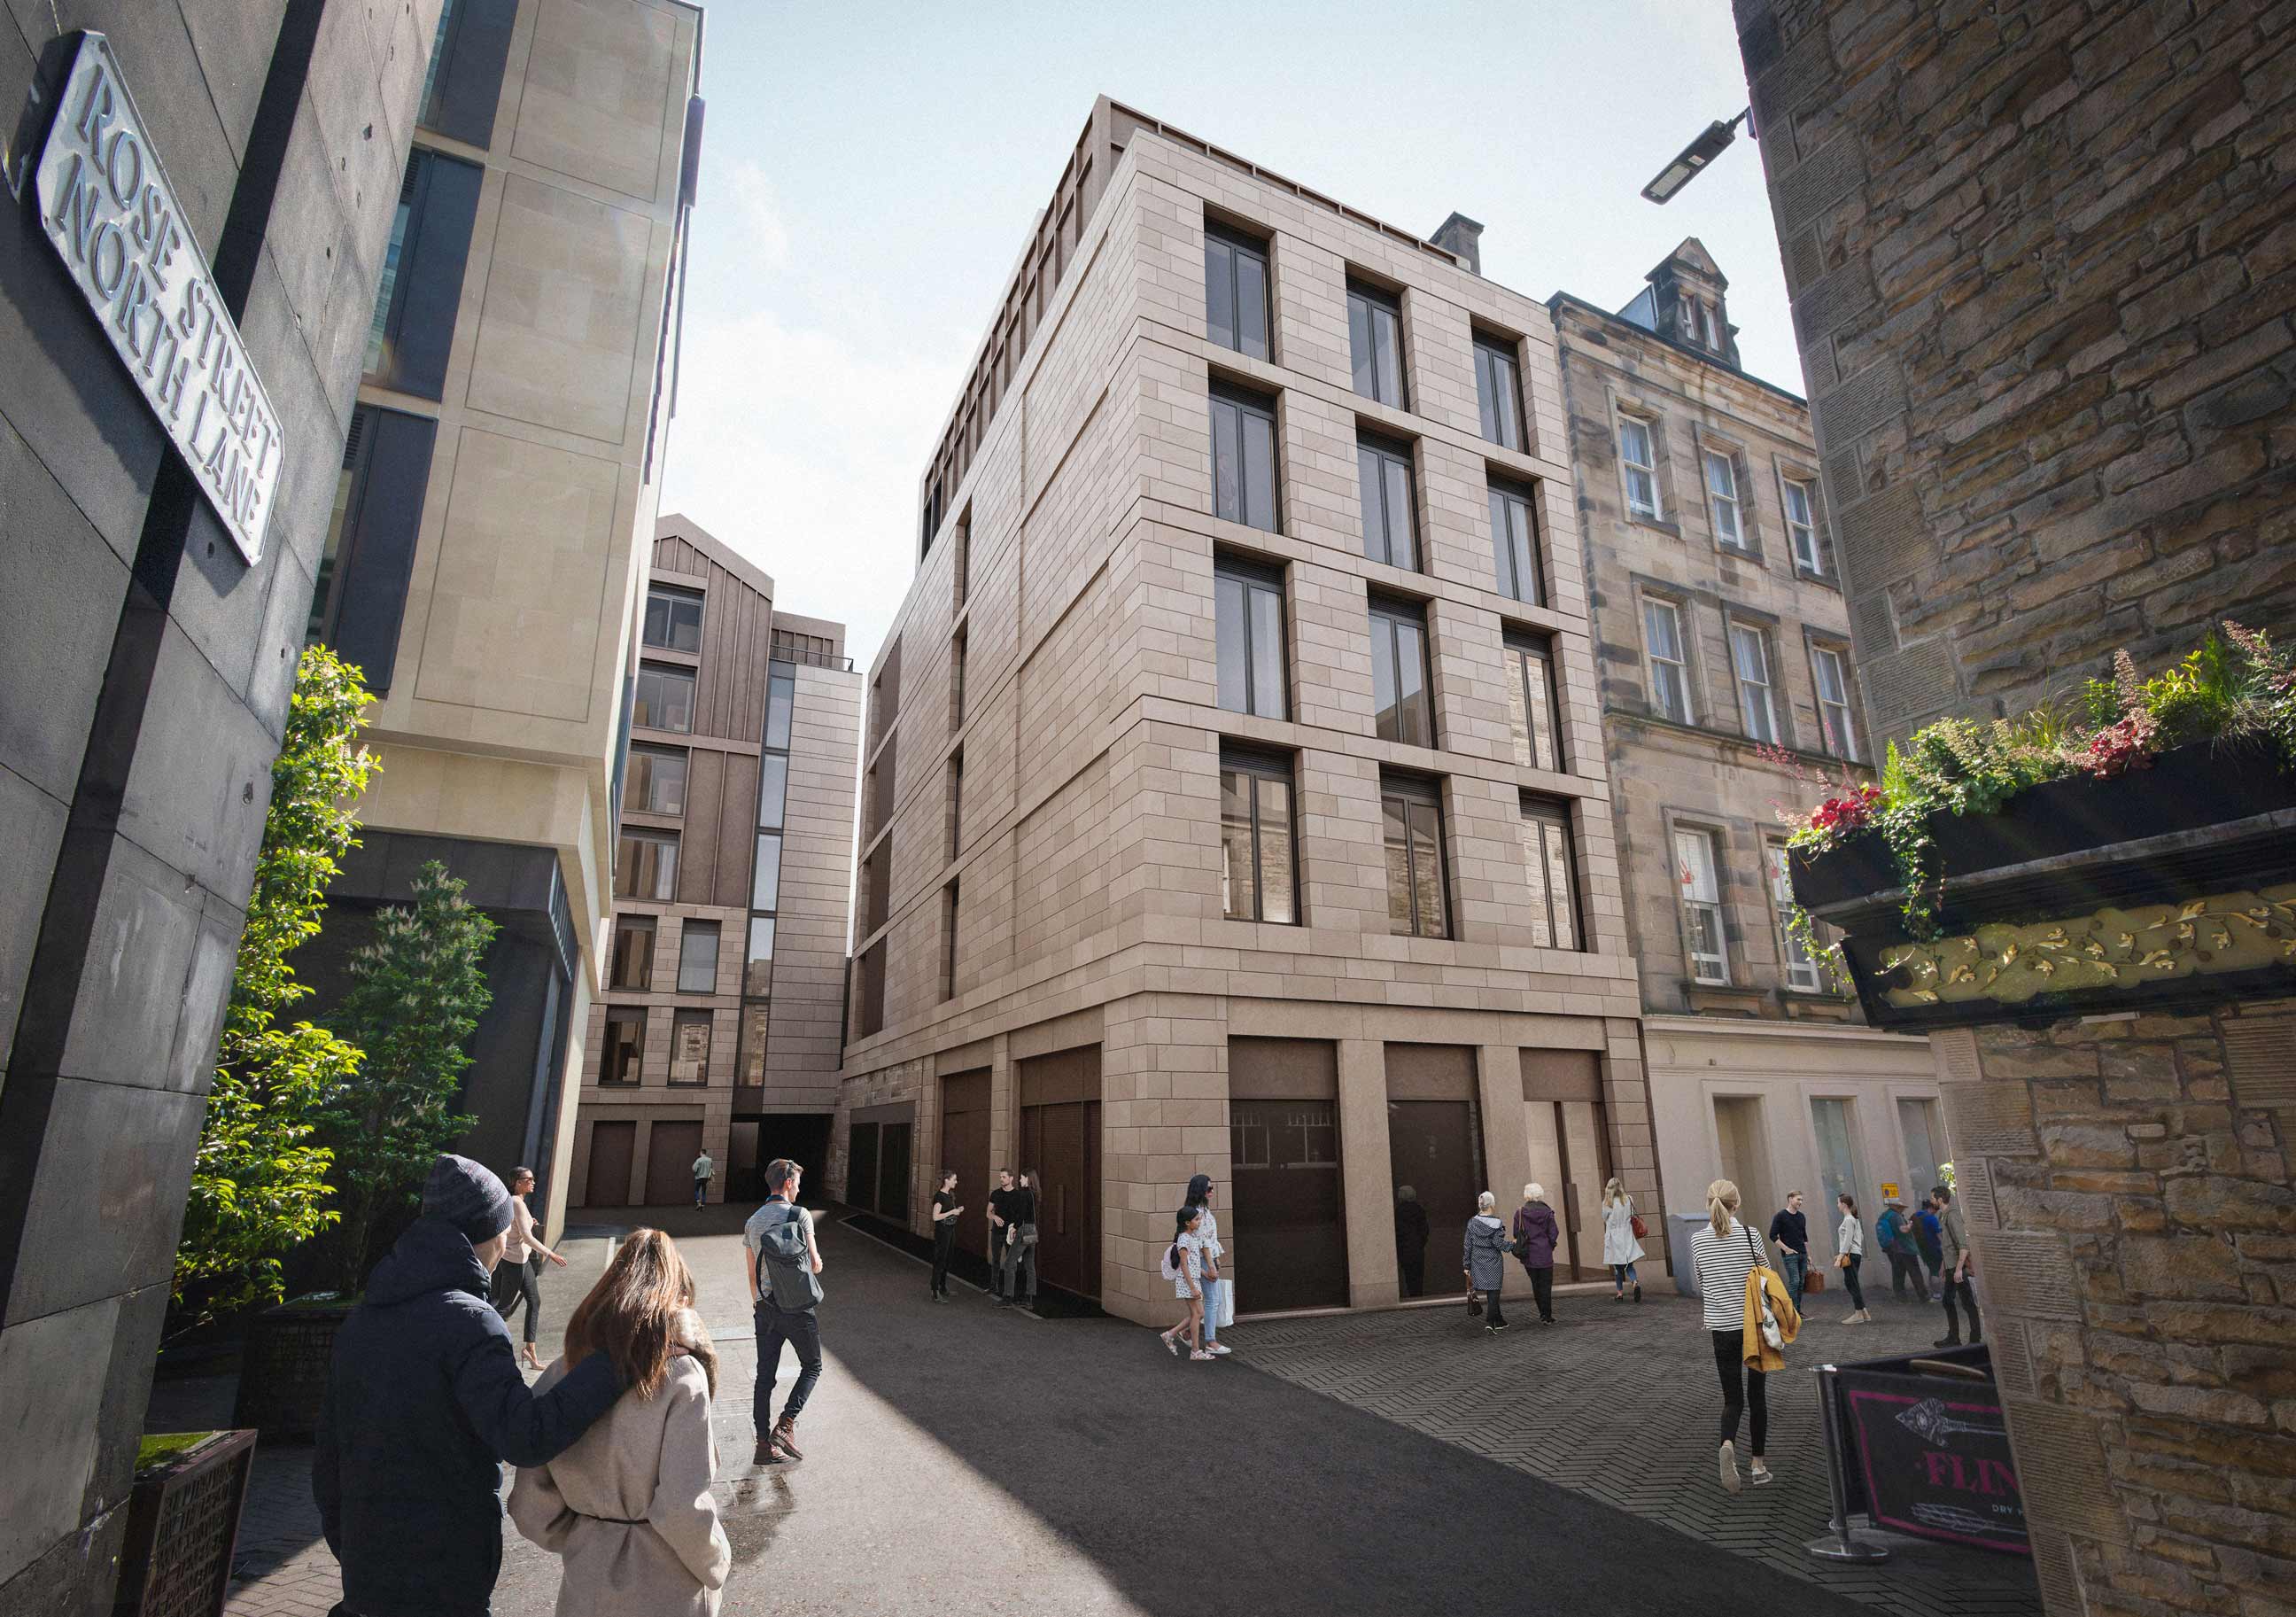 Hotel-led development to inject new lease of life to corner Princes Street site